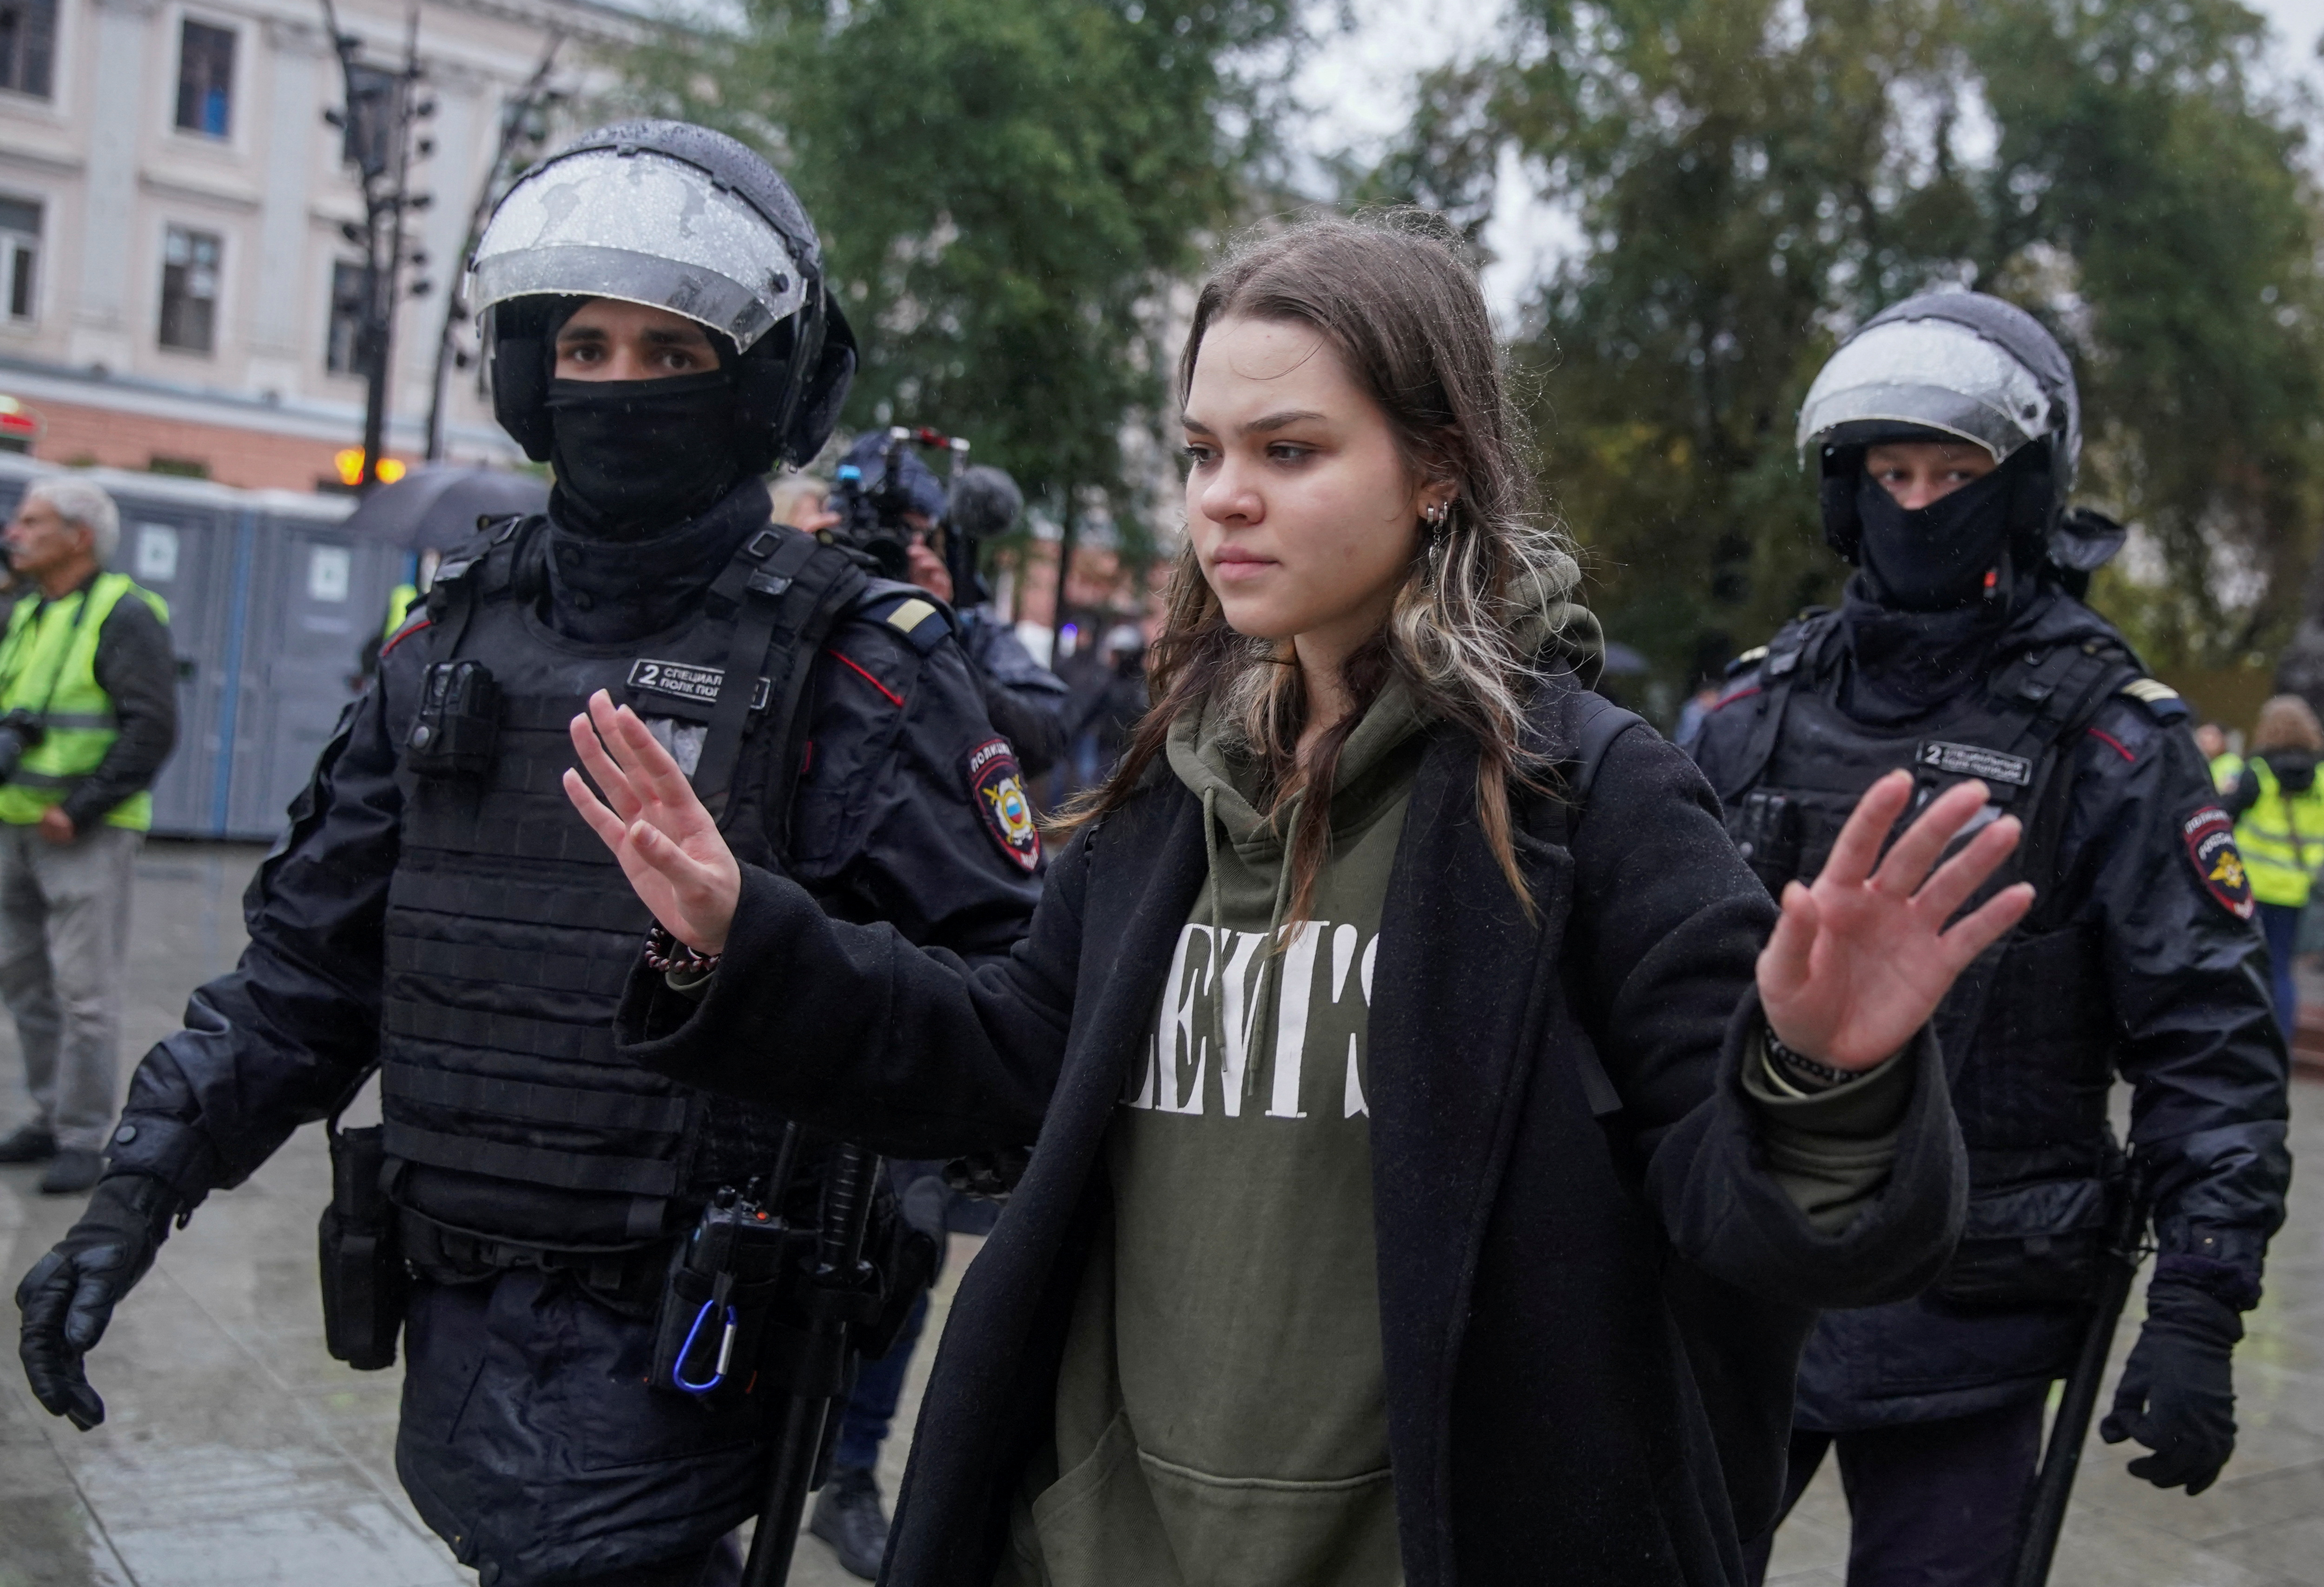 Russian police officers lead away a person during a rally in Moscow